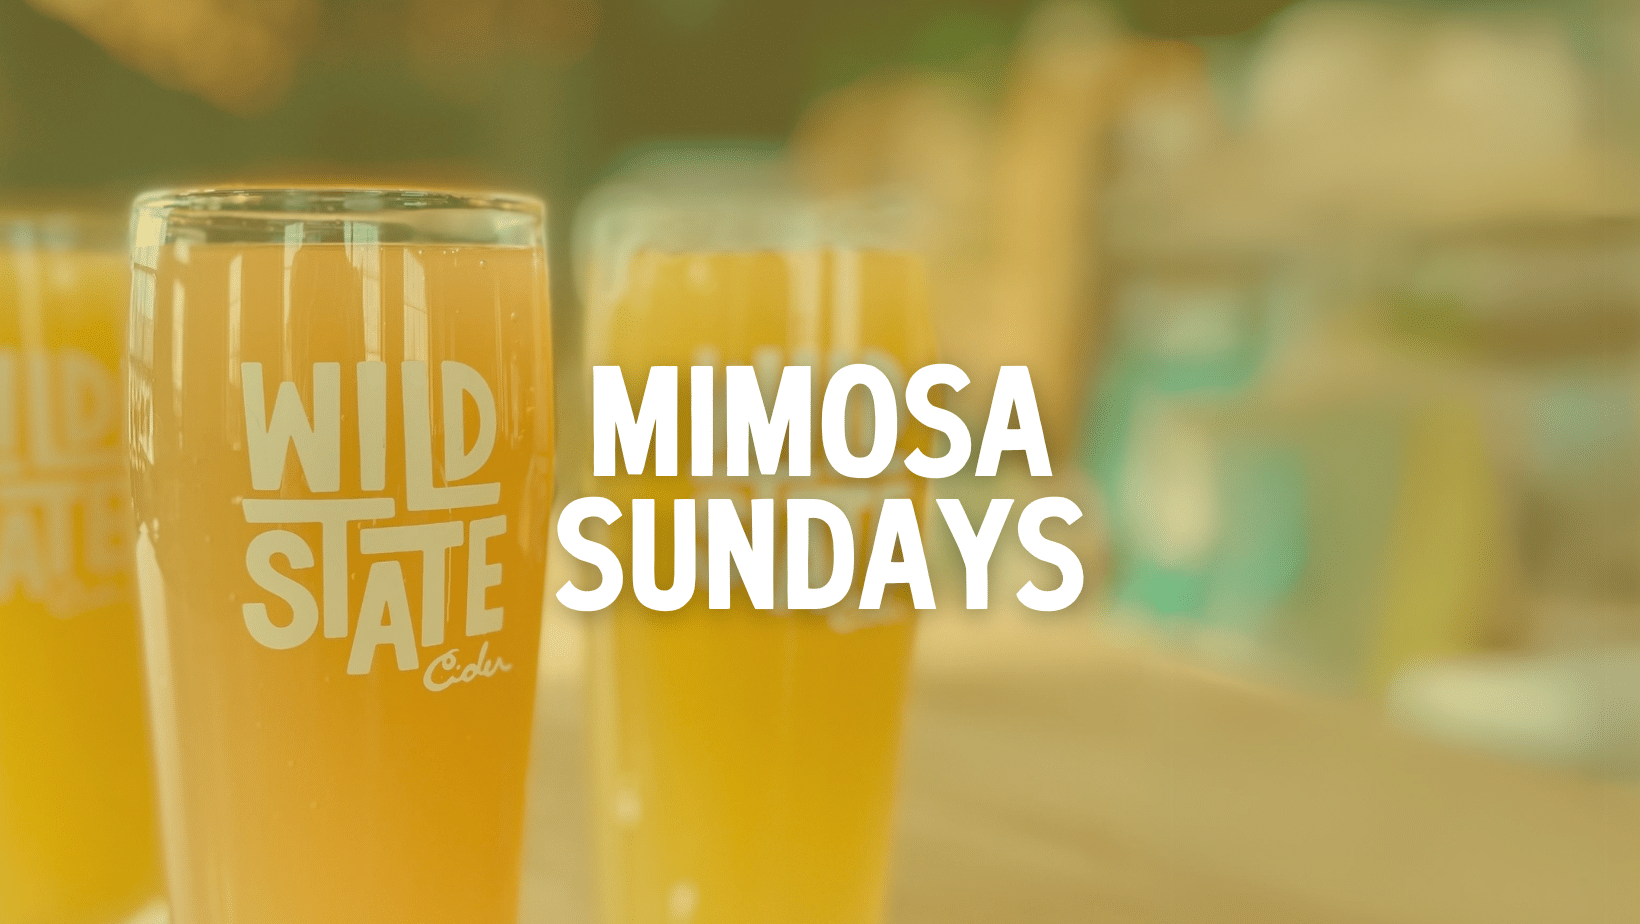 pint glass of mimosa with text reading 'mimosa sundays'